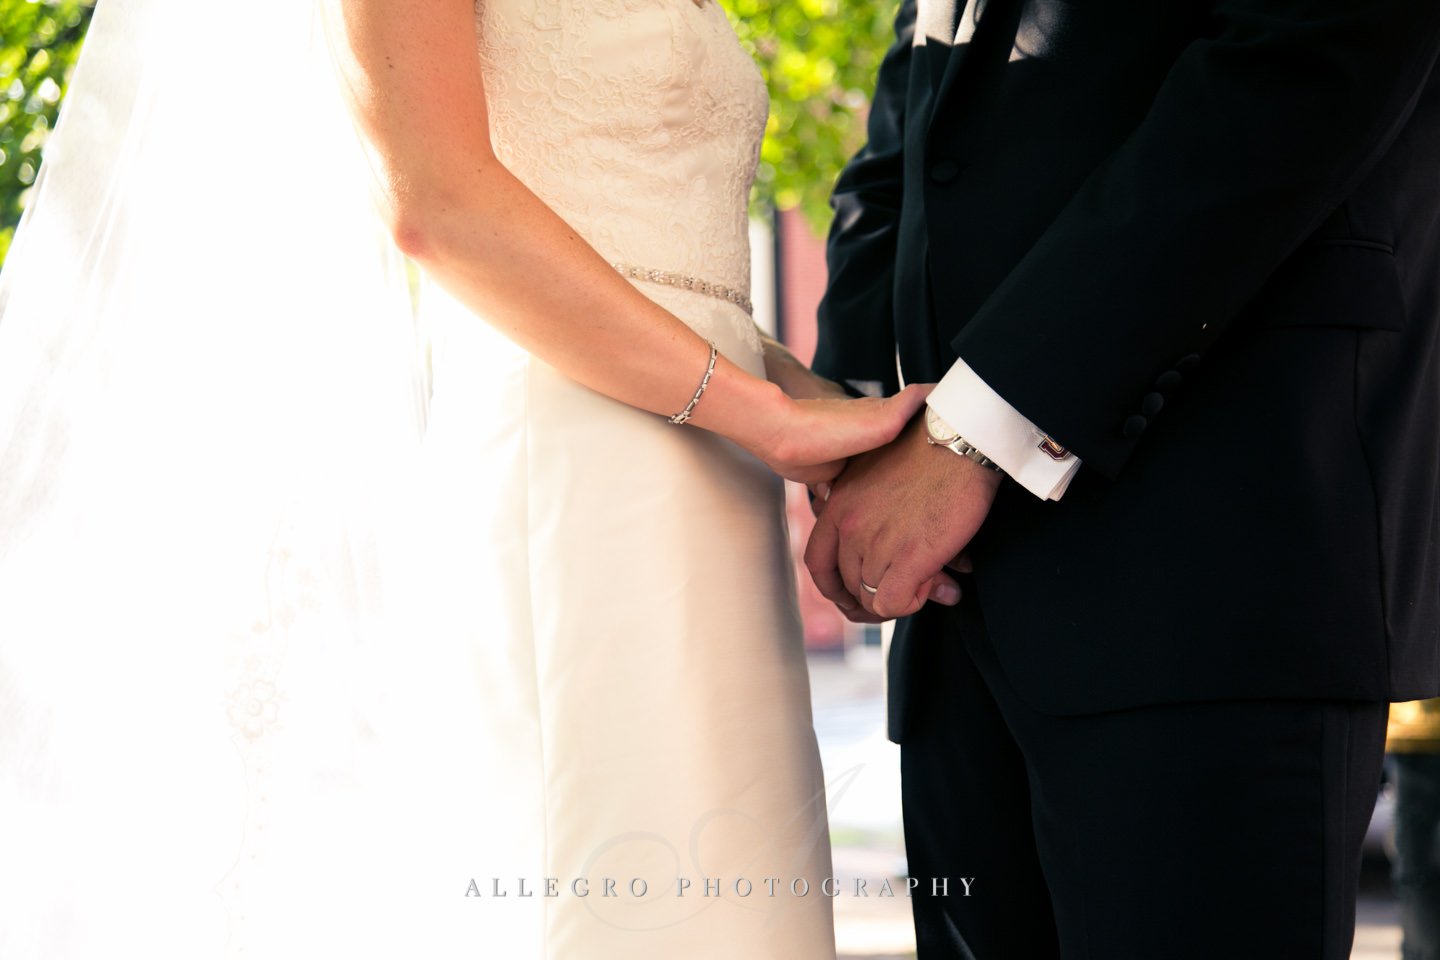 holding hands photo by Allegro Photography